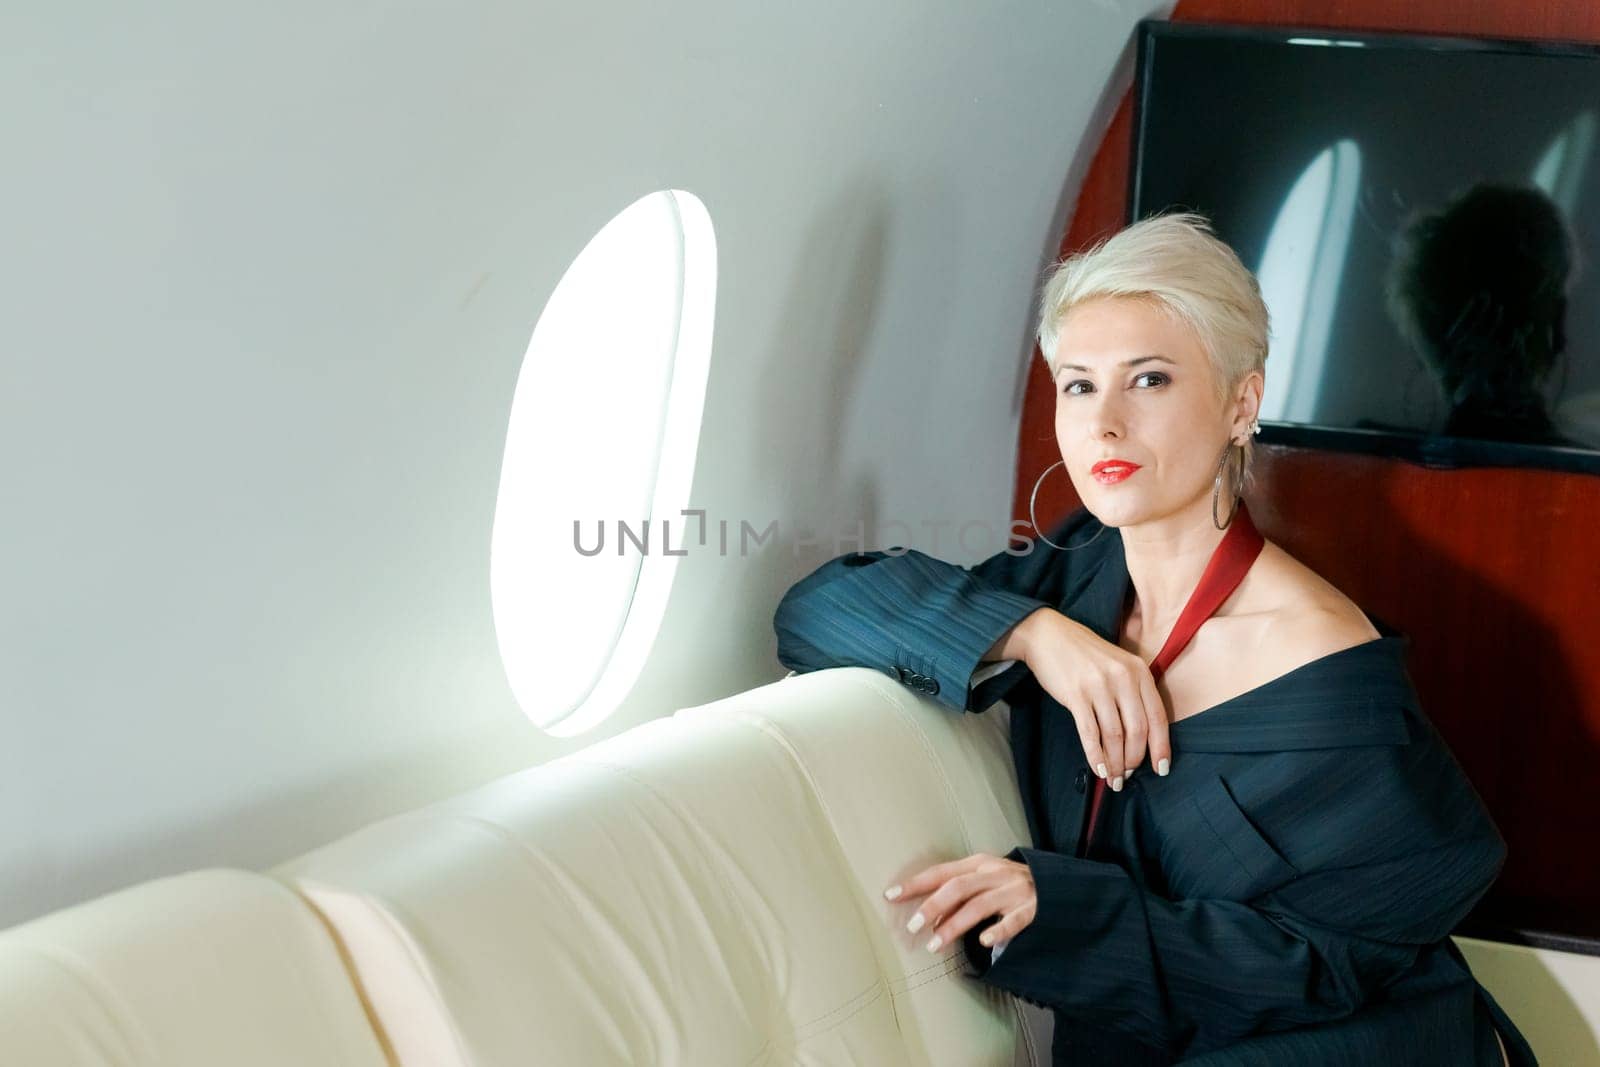 Woman private plane in a jacket with a red tie, New Year's Eve flight, holiday and travel concept. by EkaterinaPereslavtseva